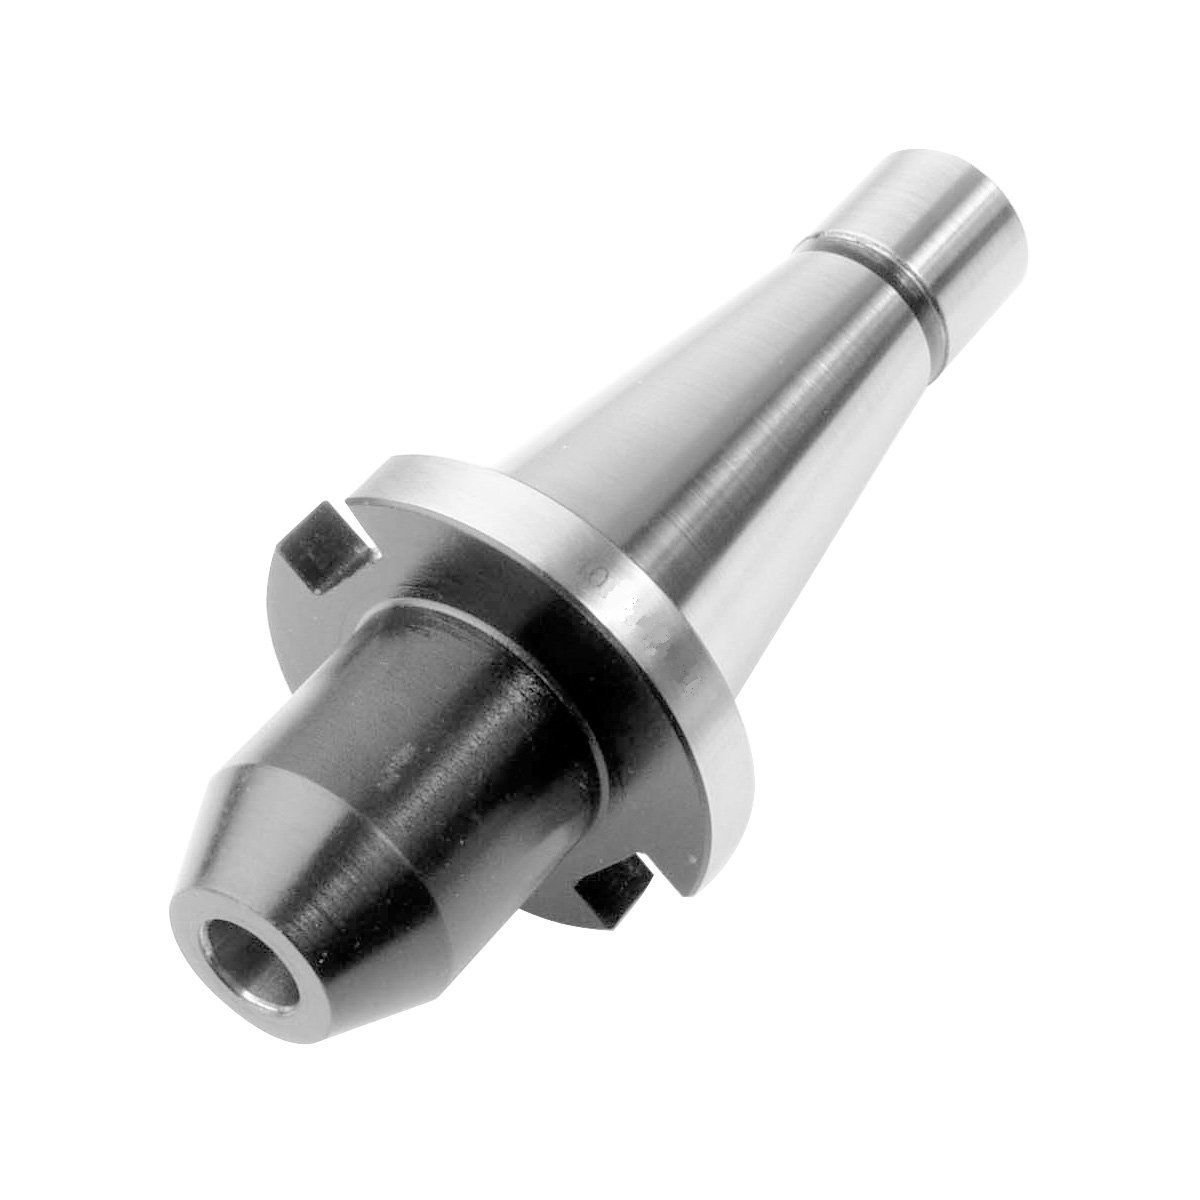 #40 NMTB X 1/4" END MILL HOLDER (3900-1718)